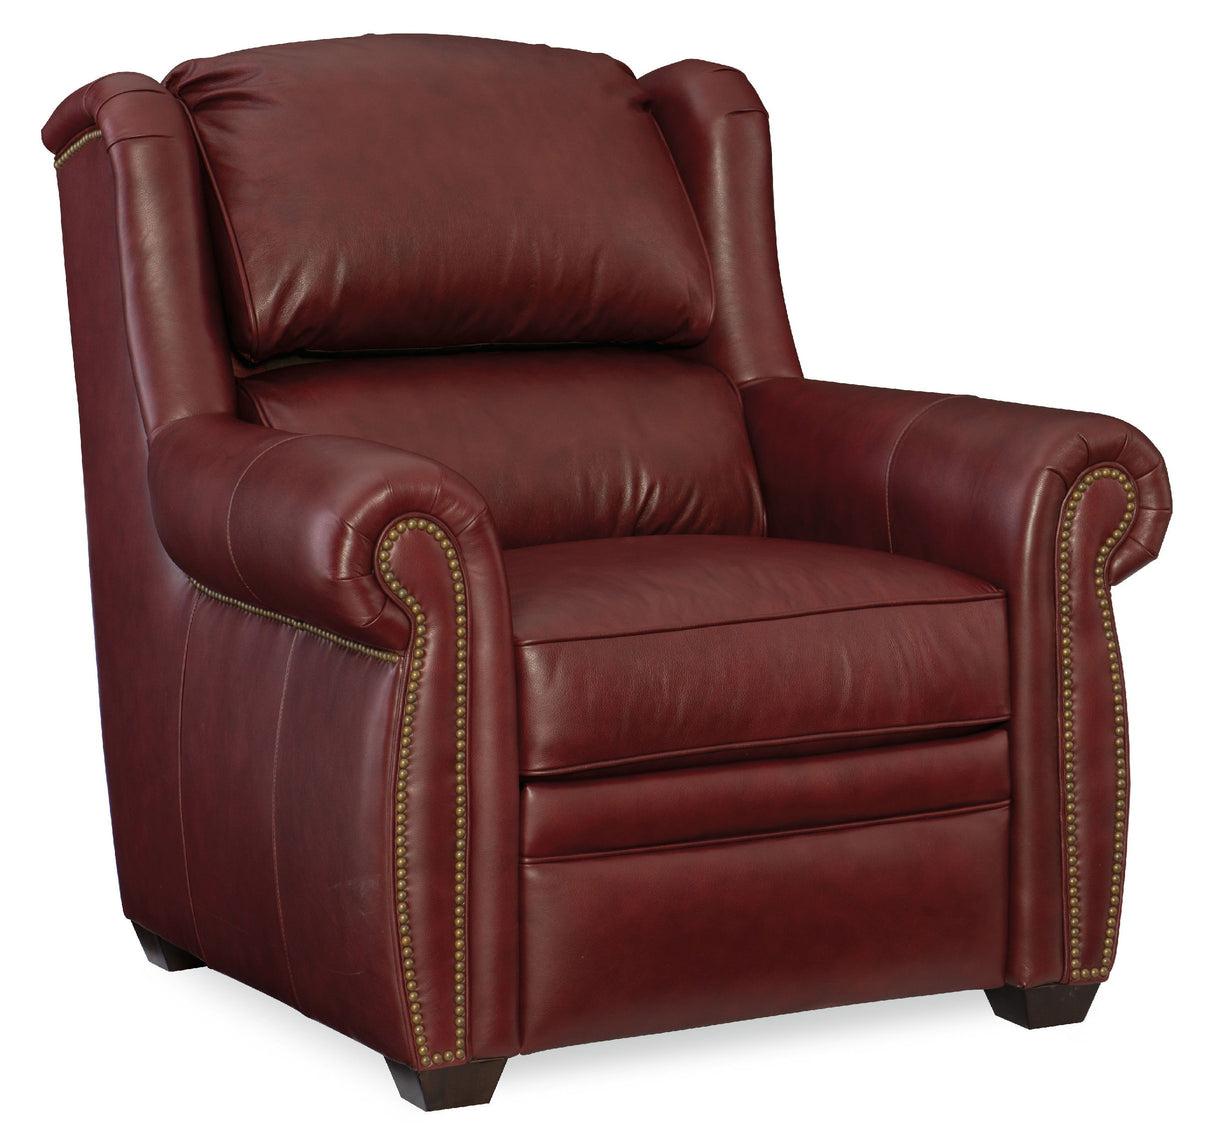 Discovery - Chair Full Recline, With Articulating Headrest - Dark Brown